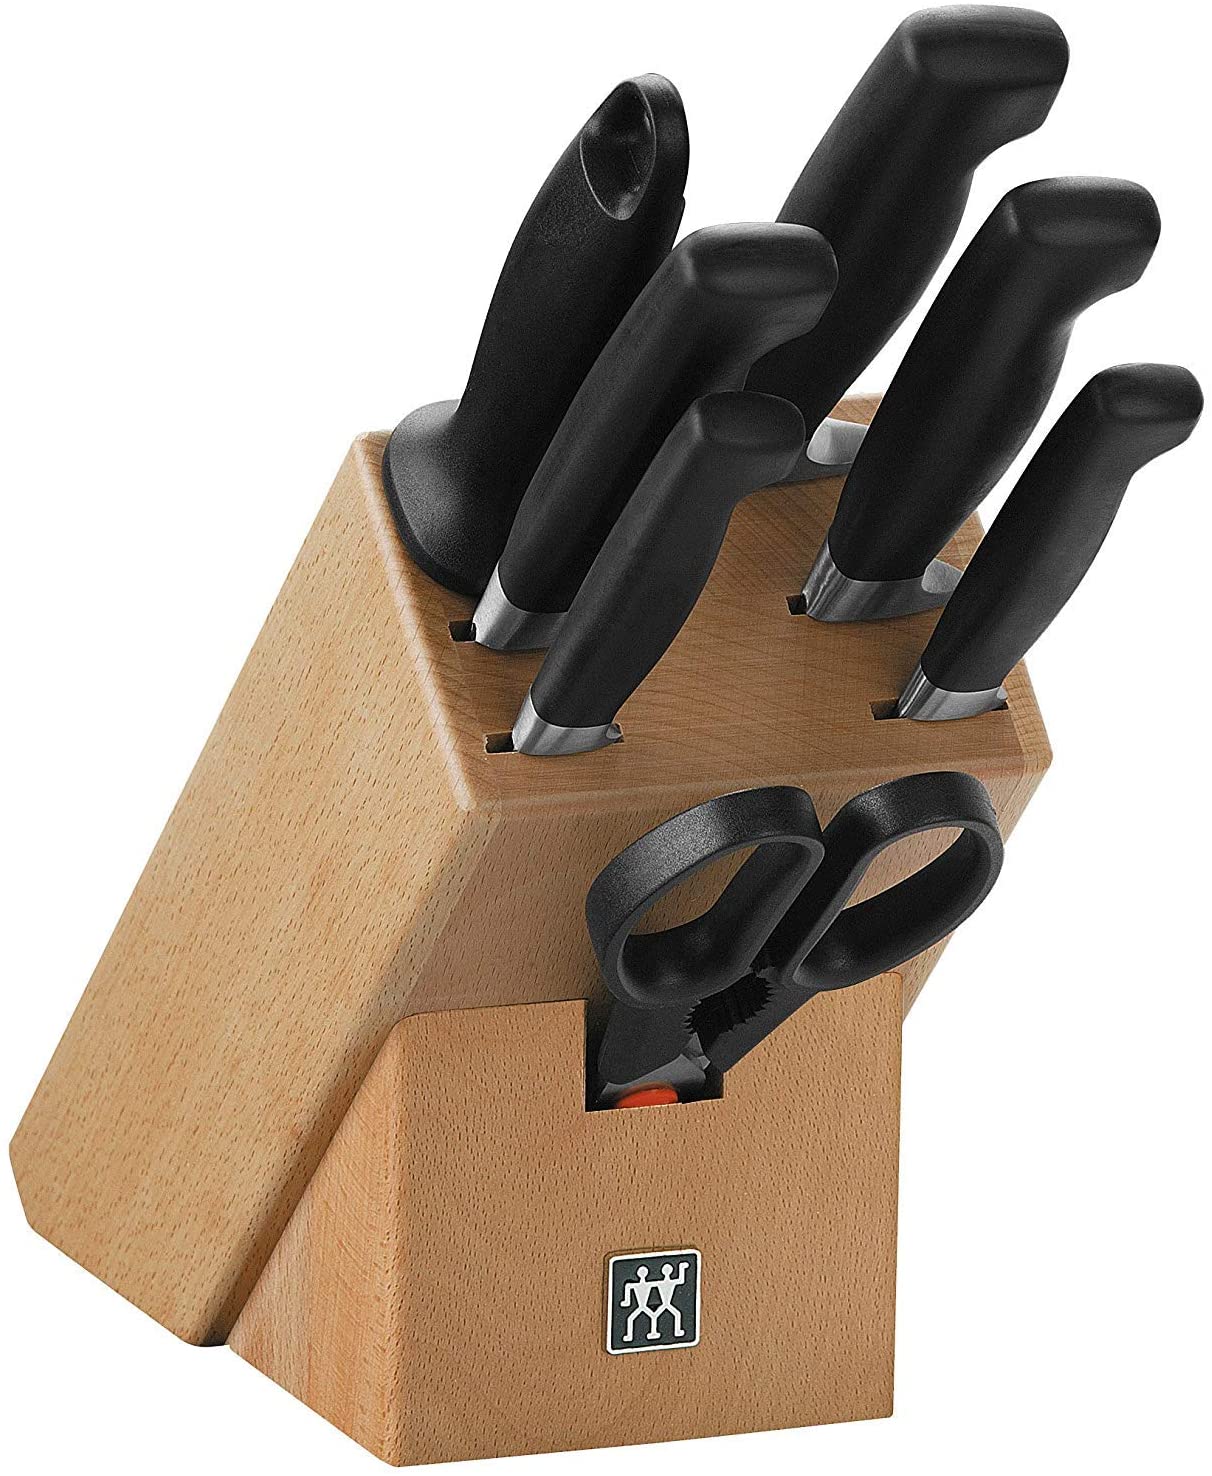 Zwilling, 35140-000-0 Four star knife block, FRIODUR ice-hardened, with sharpening steel and scissors, 8 pieces, light brown